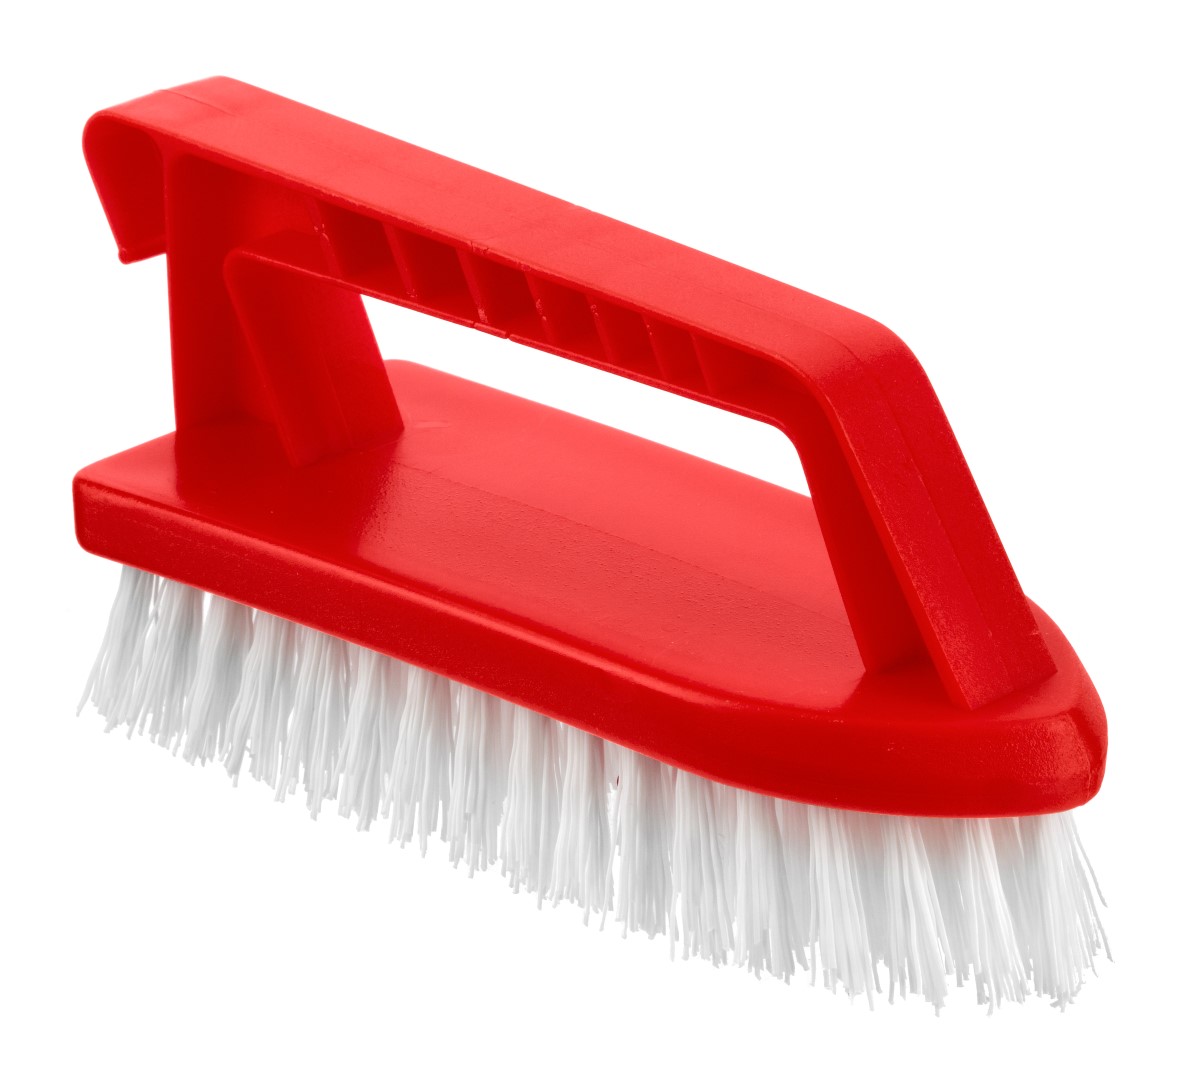 Tonkita Laundry Brush With Handle Red in Tonkita Products from